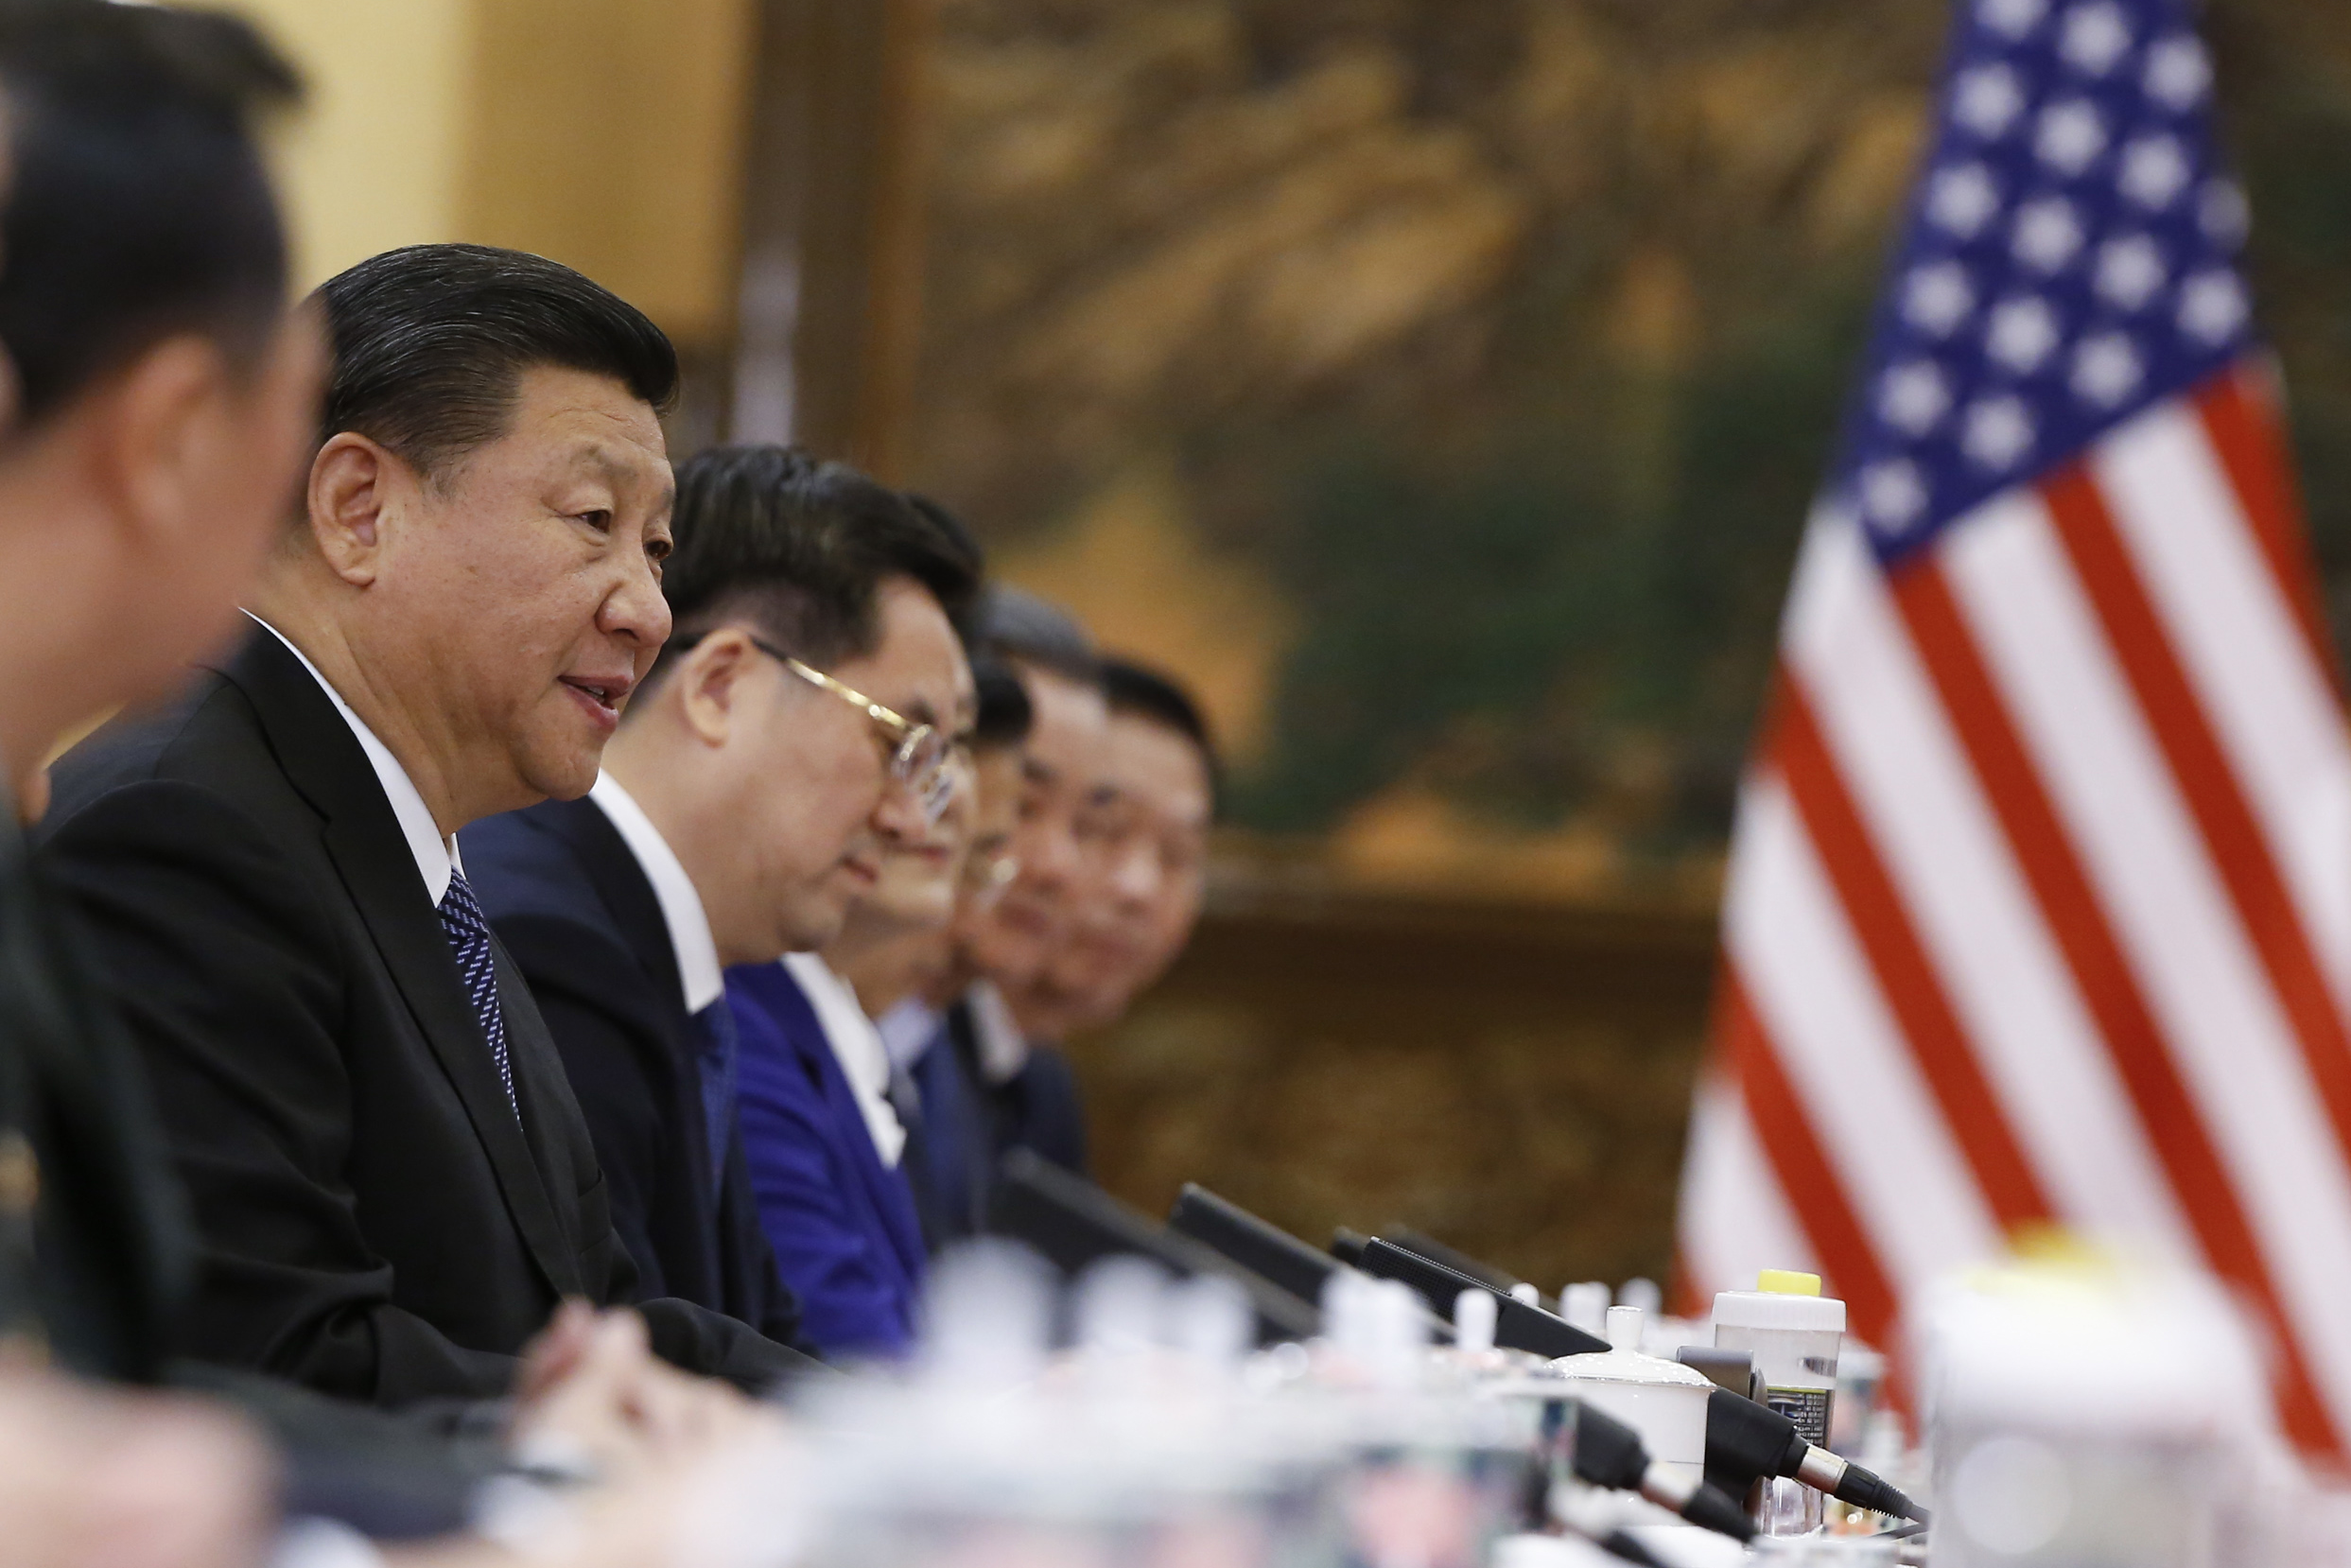 China's President Xi Jinping sits at a long table with other people with the American flag in the background